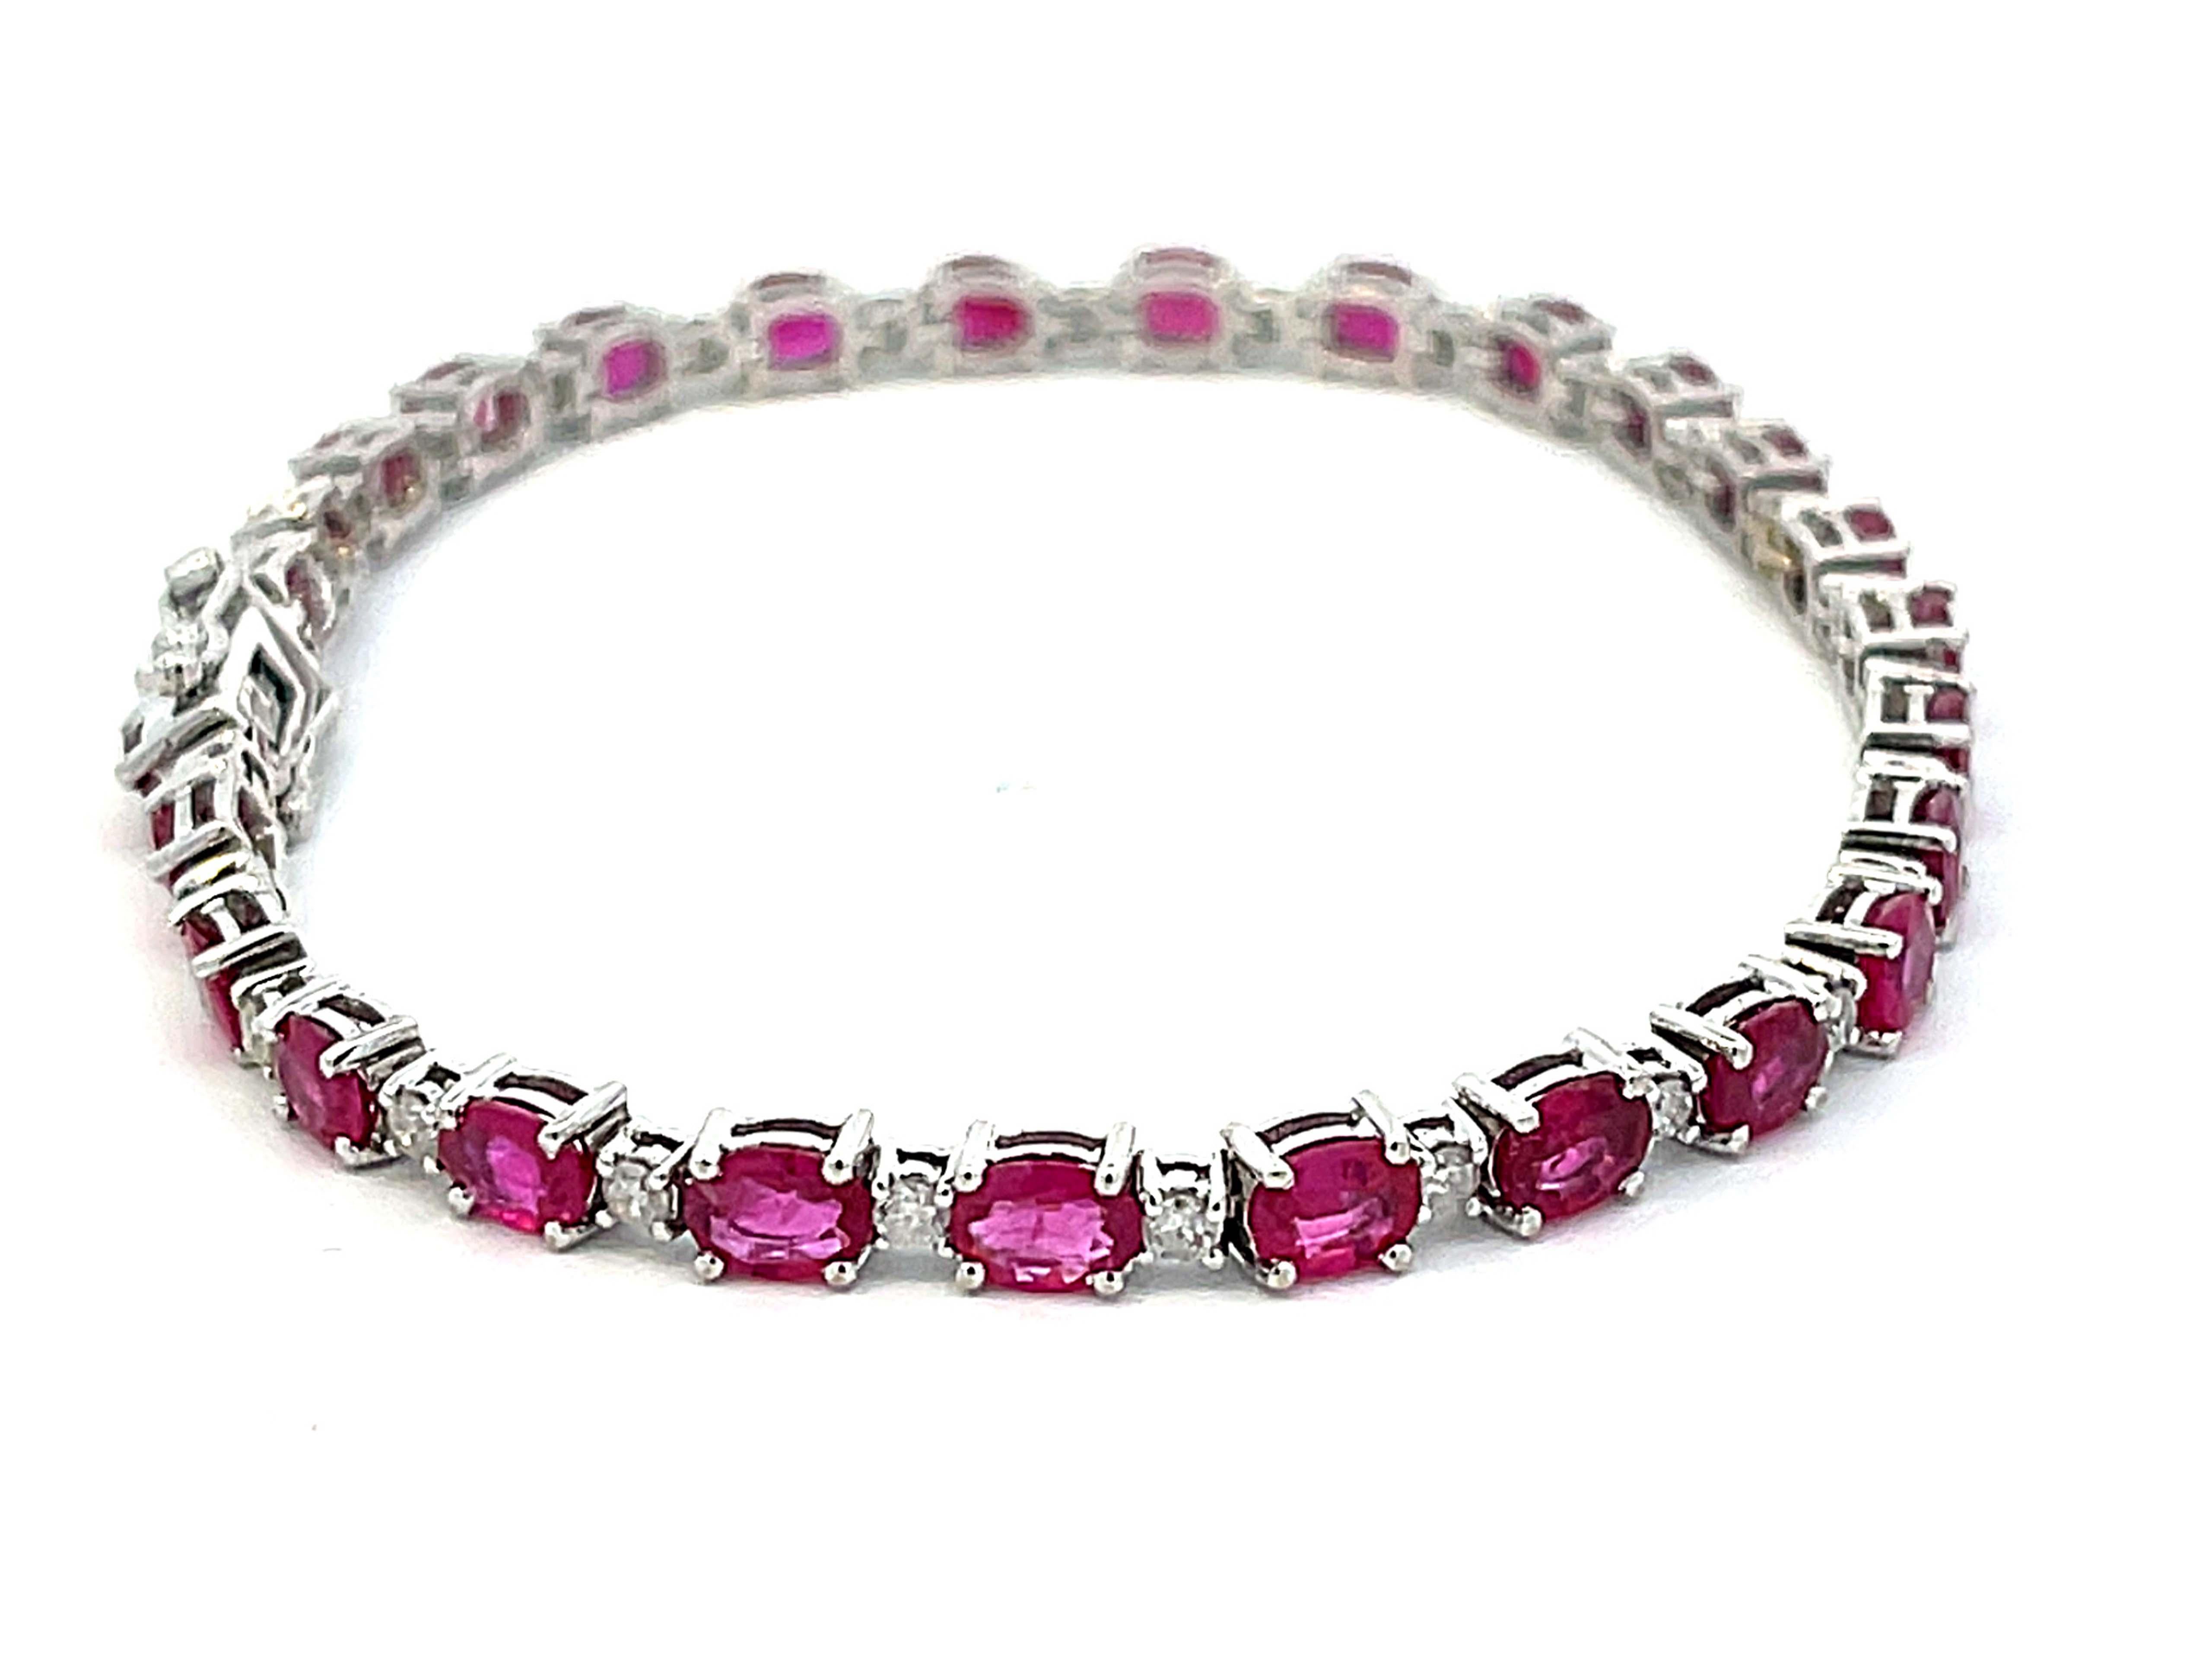 Brilliant Cut Oval Red Ruby and Diamond Tennis Bracelet in 14k White Gold